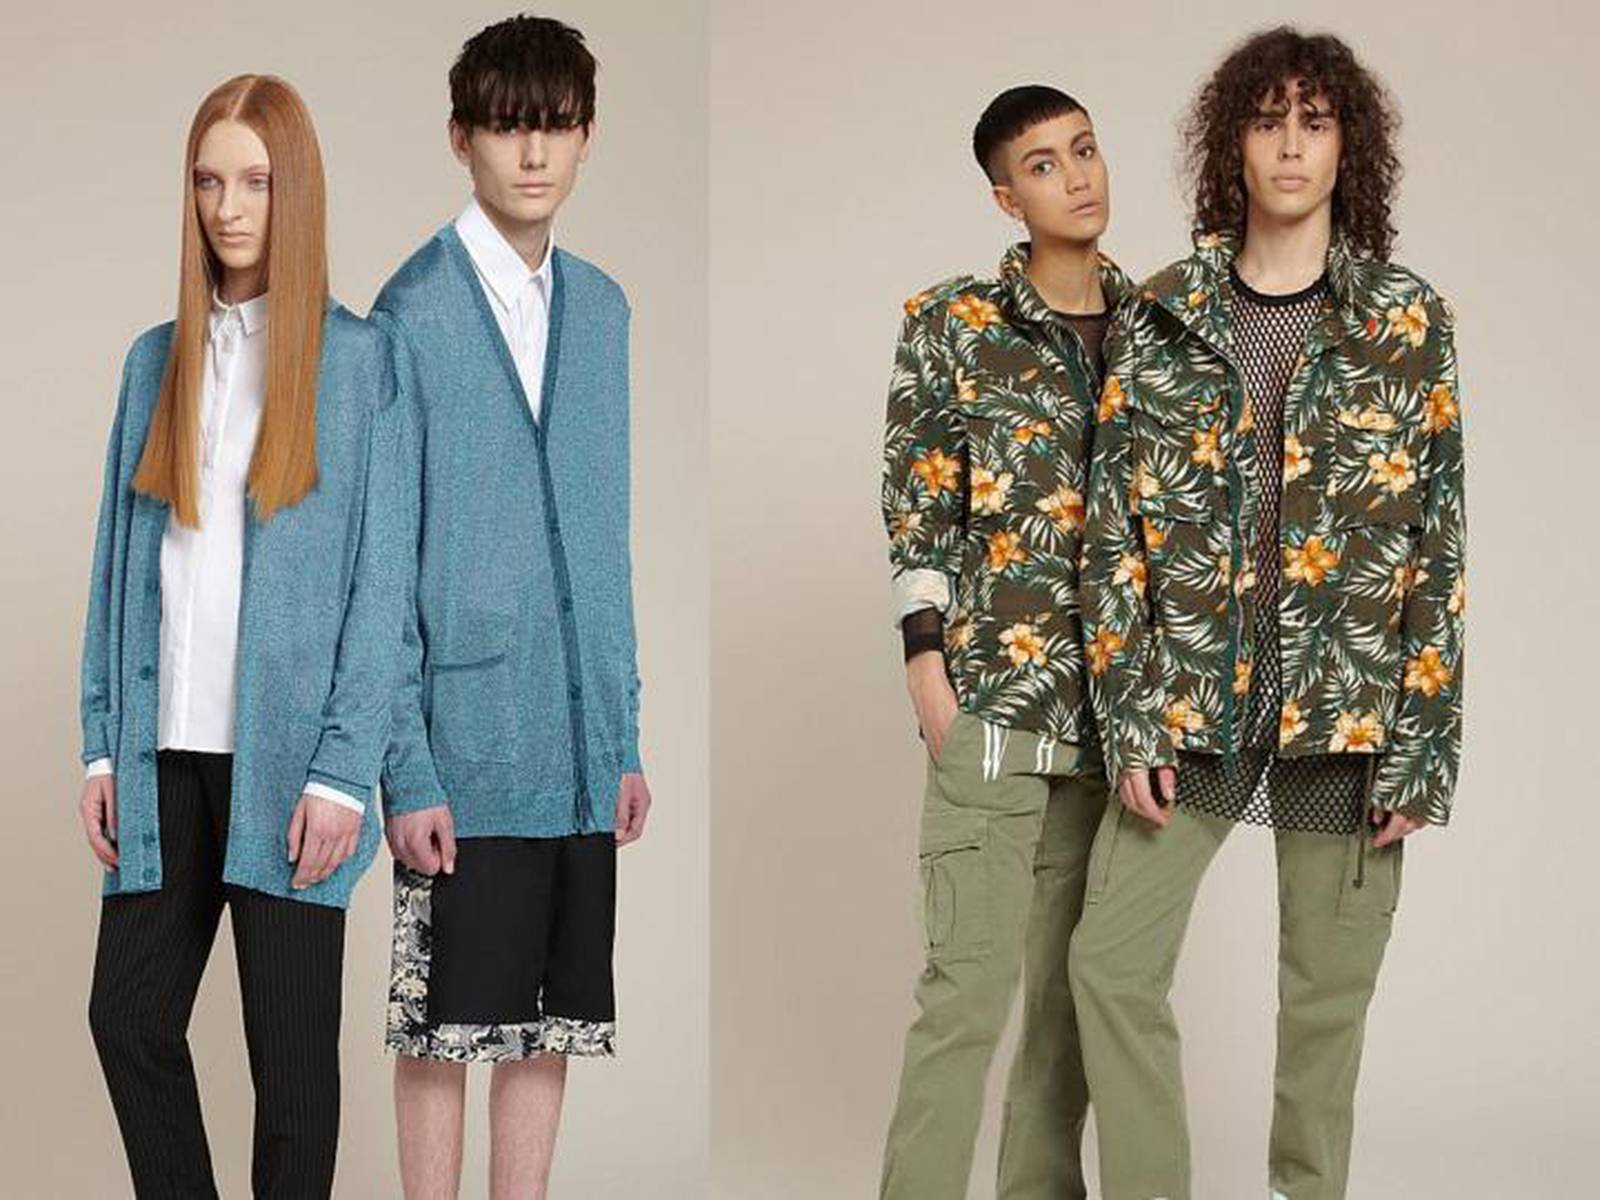 Gender neutral: fashion for everyone – The Irish Times